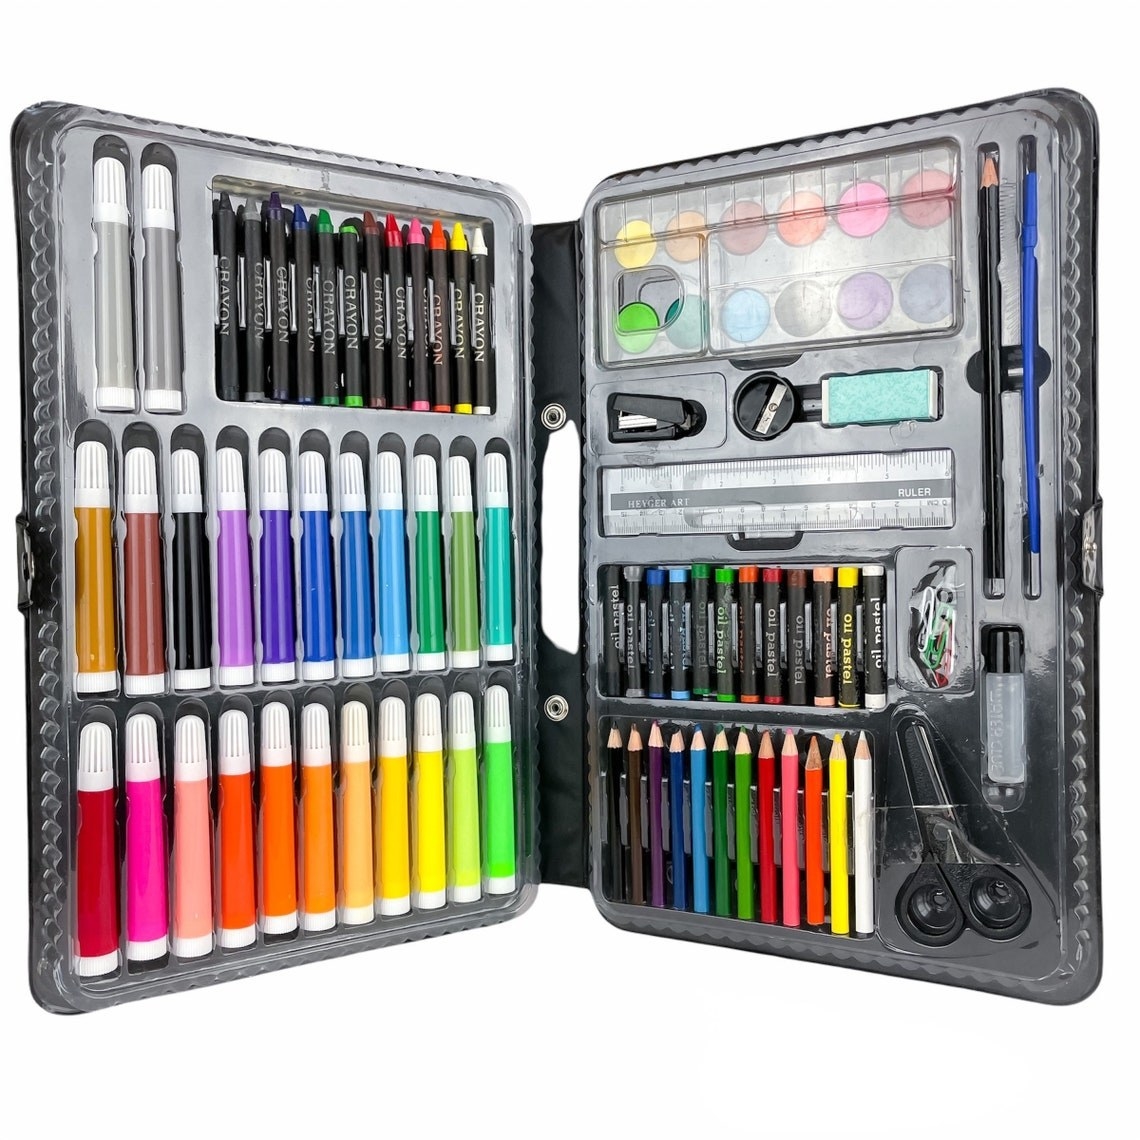 Art supplies box featuring markers, scissors, and colored pencils